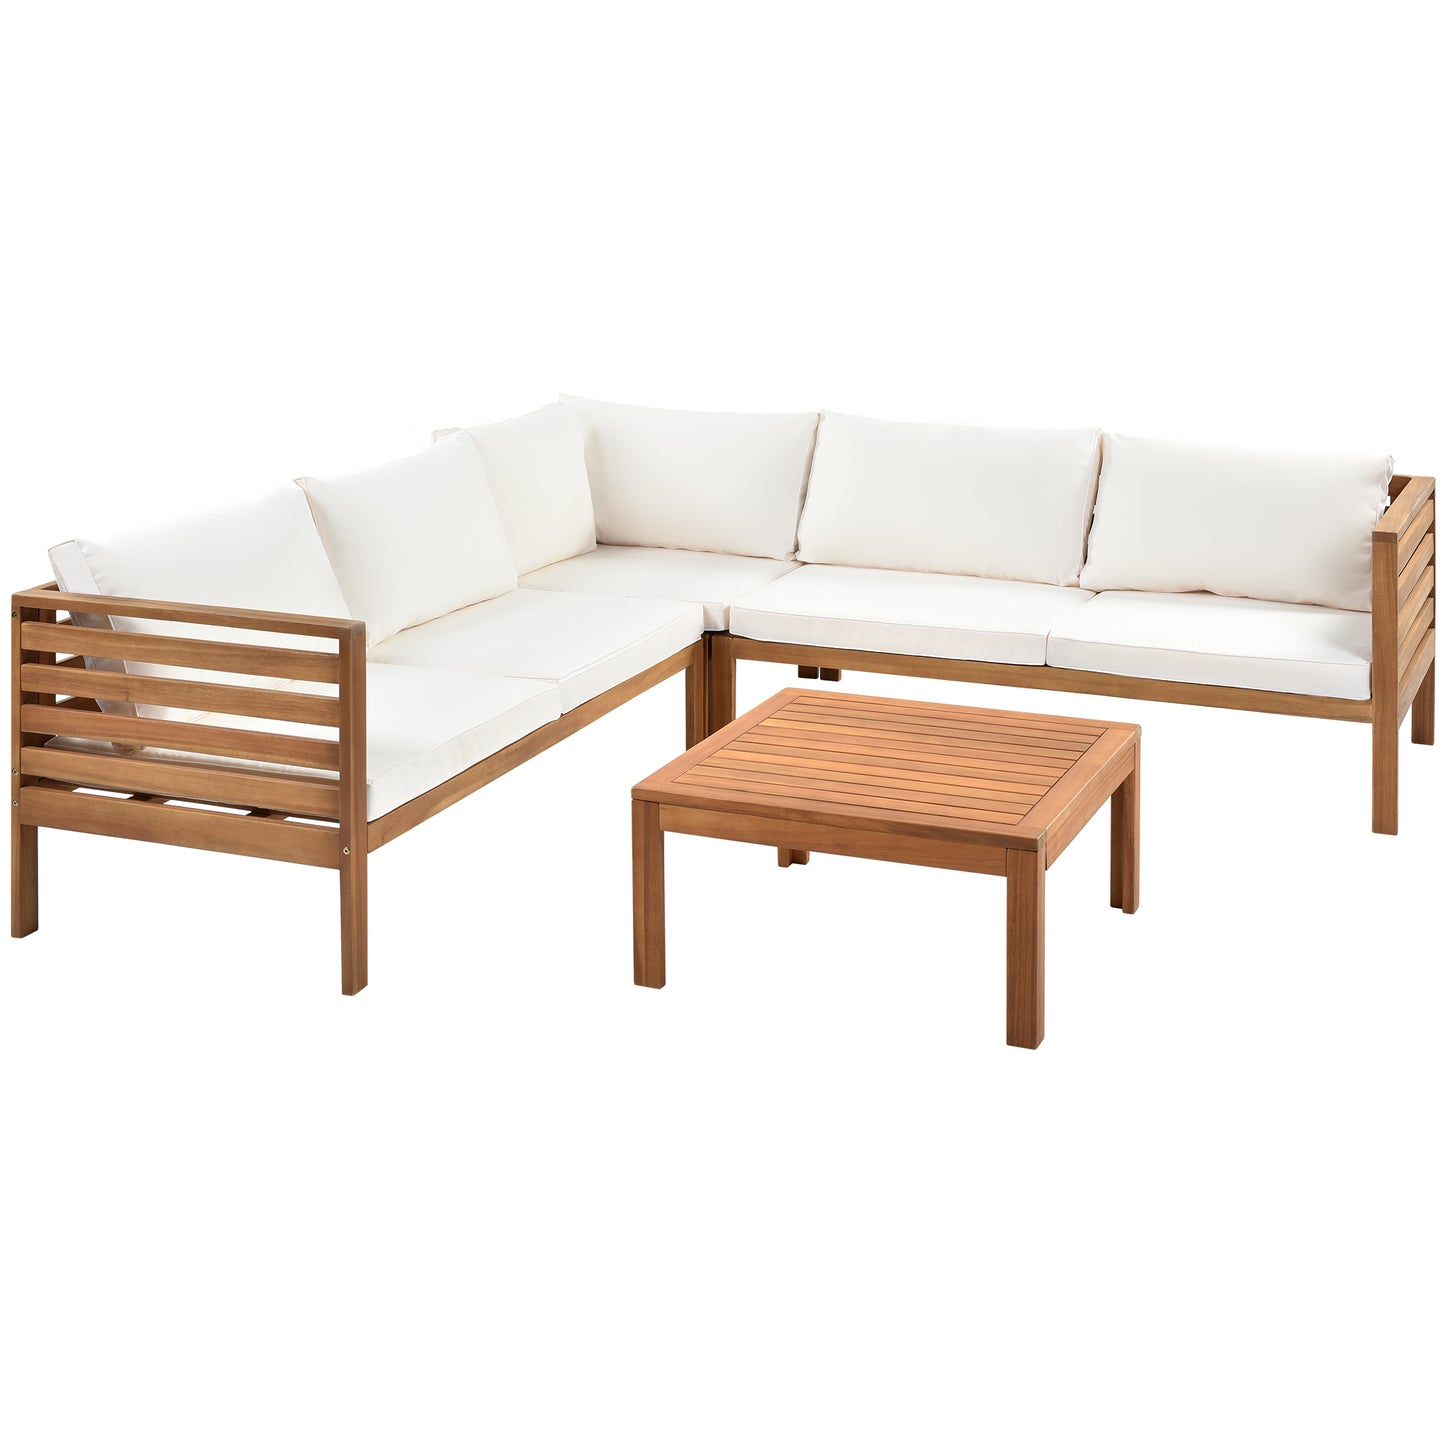 4 Piece Wood Patio Furniture Set, Outdoor Seating Chat Set with Beige Cushions, Sectional Conversation Sofa Chairs Set with Coffee Table, for Balcony, Backyard, Poolside, Deck, Garden, D7487